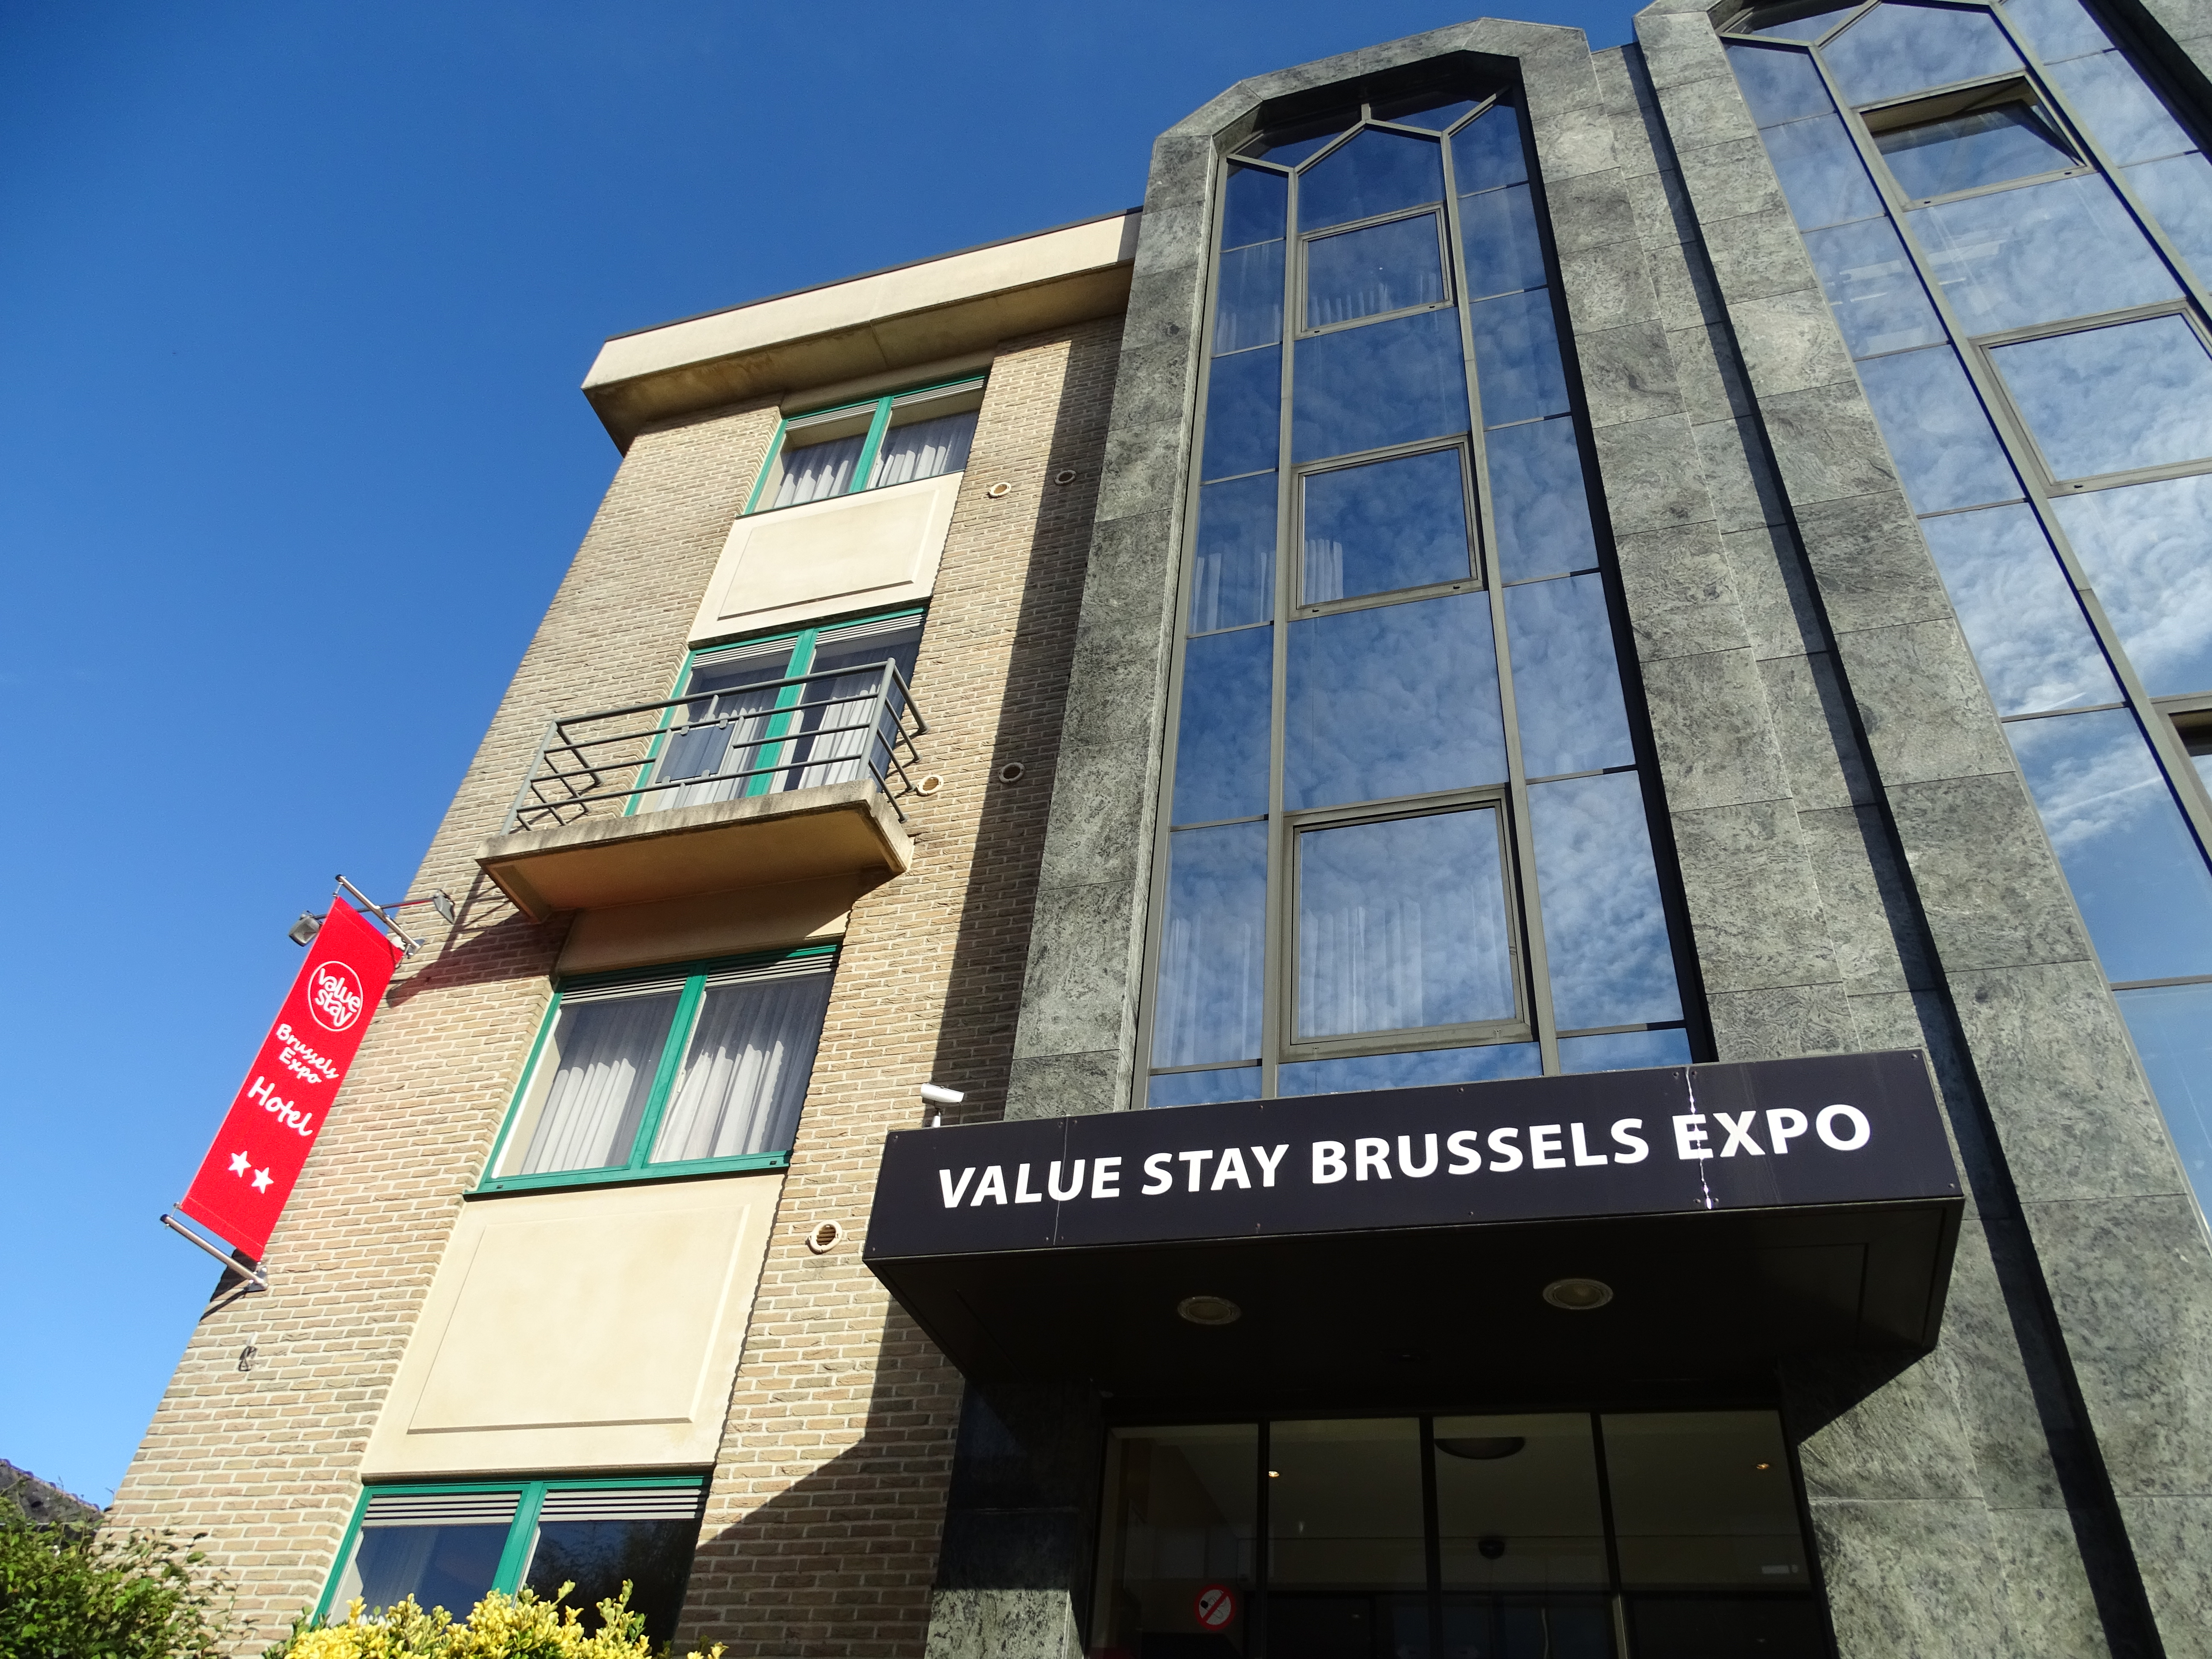 Value Stay Brussels Expo <br/>53.00 ew <br/> <a href='http://vakantieoplossing.nl/outpage/?id=866d9b1186827bfde0a3b874a895990f' target='_blank'>View Details</a>